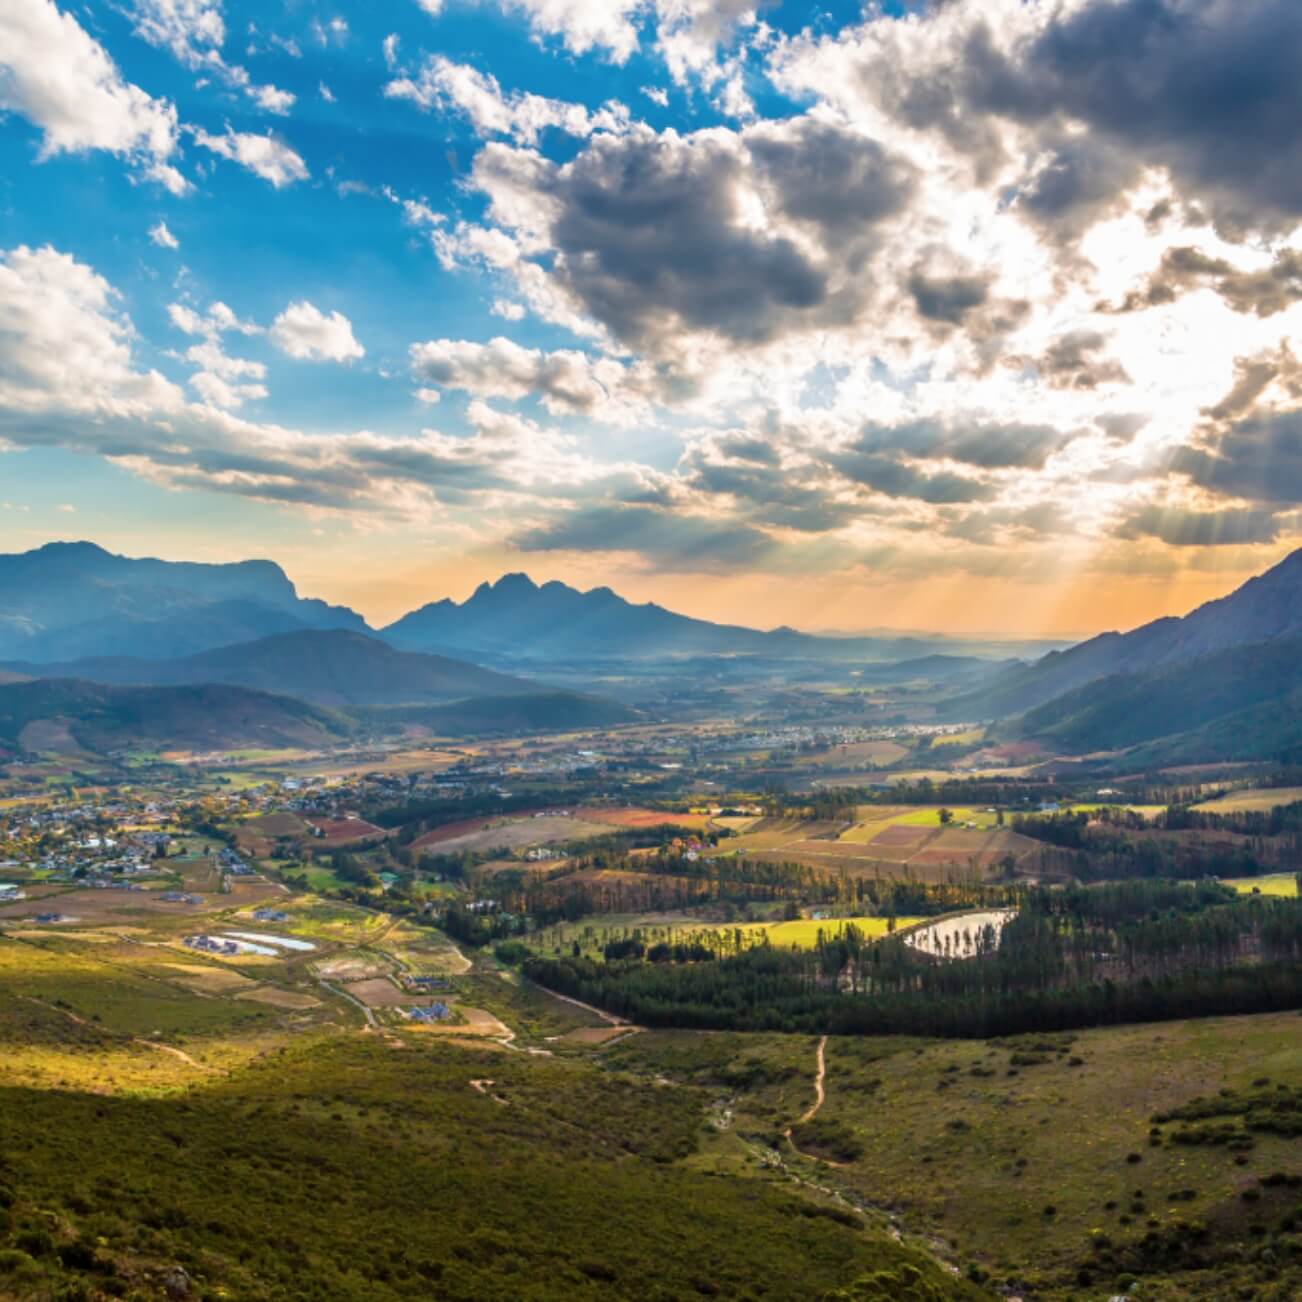 Explore the awe-inspiring natural surrounds of the Franschhoek Valley